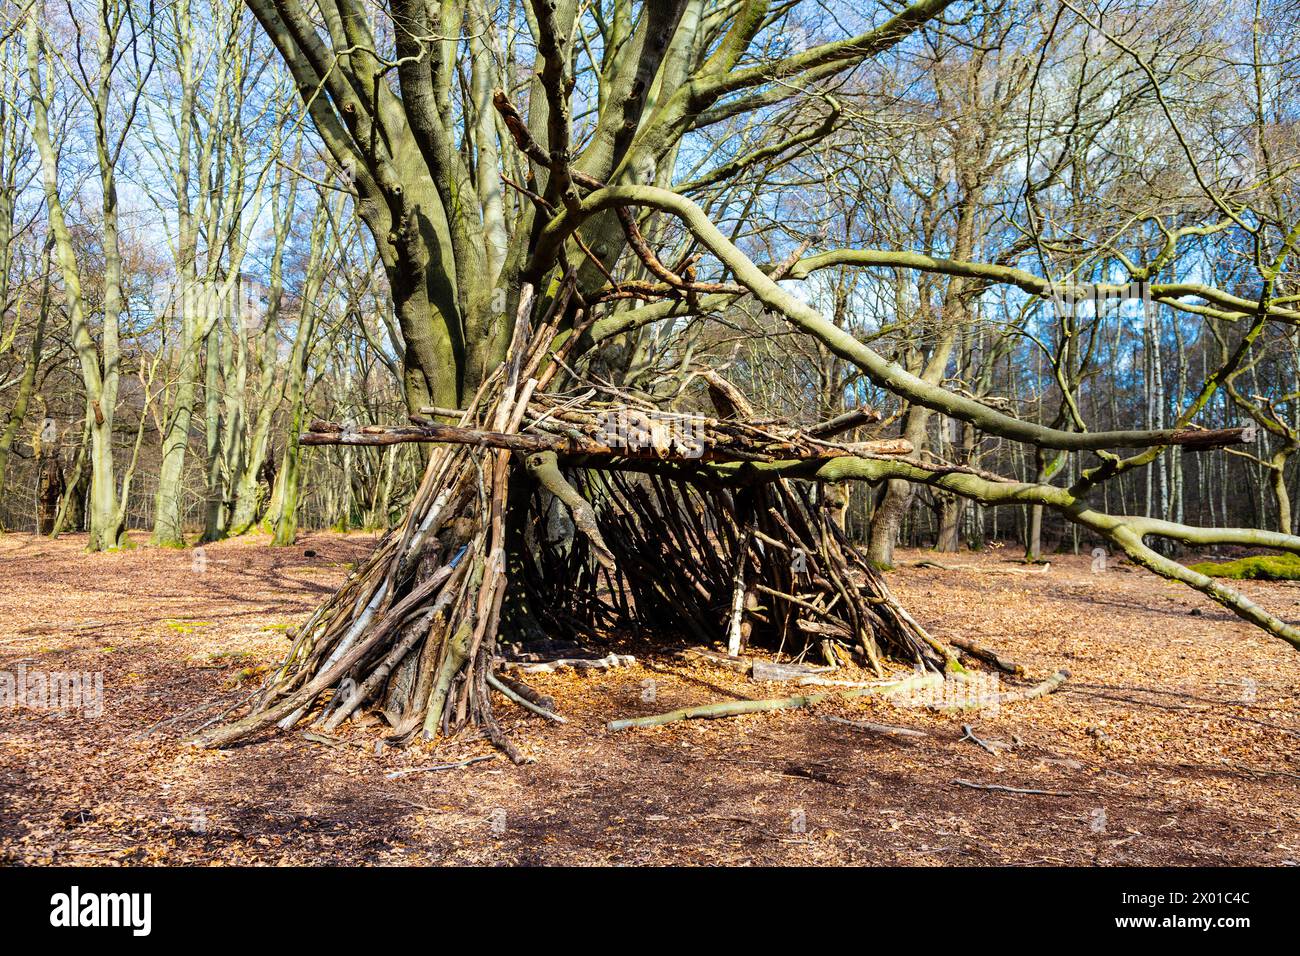 Survival shelter in the forest made of branches, Epping Forest, Essex, England Stock Photo